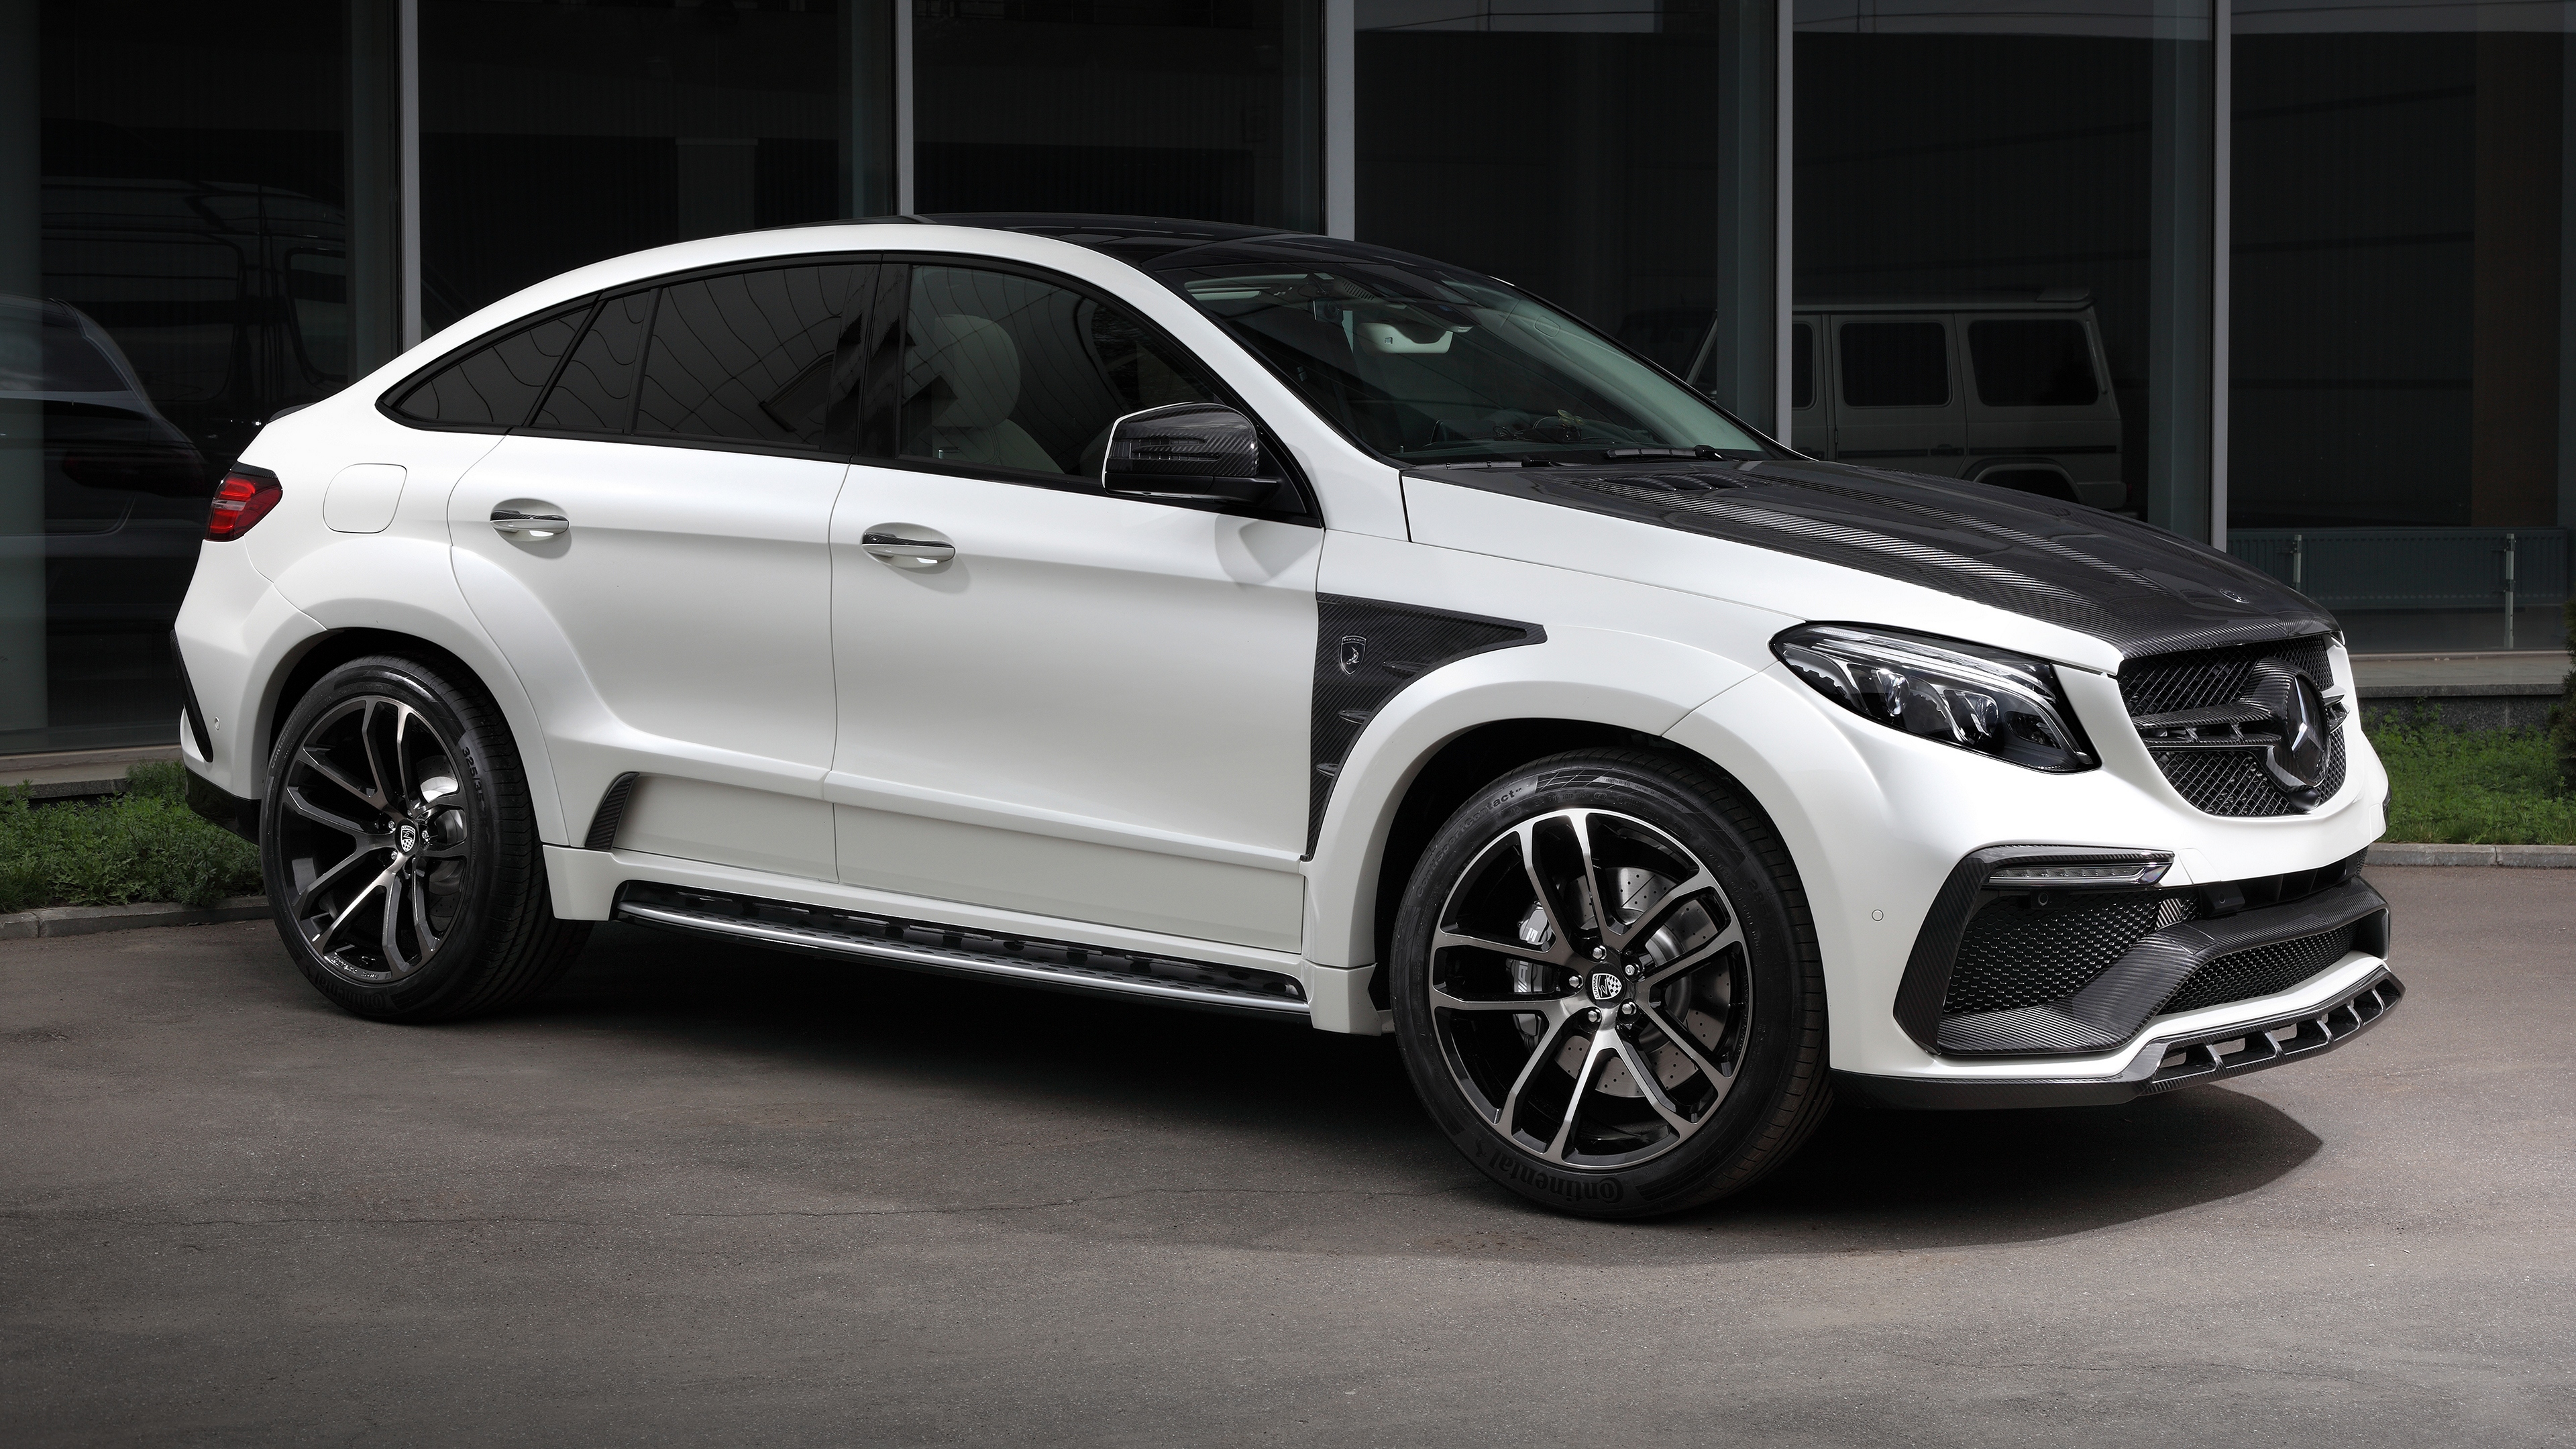 Mercedes Benz GLE Inferno Tuning German Cars White Cars Luxury Cars Car Simple Background Side View  3840x2160